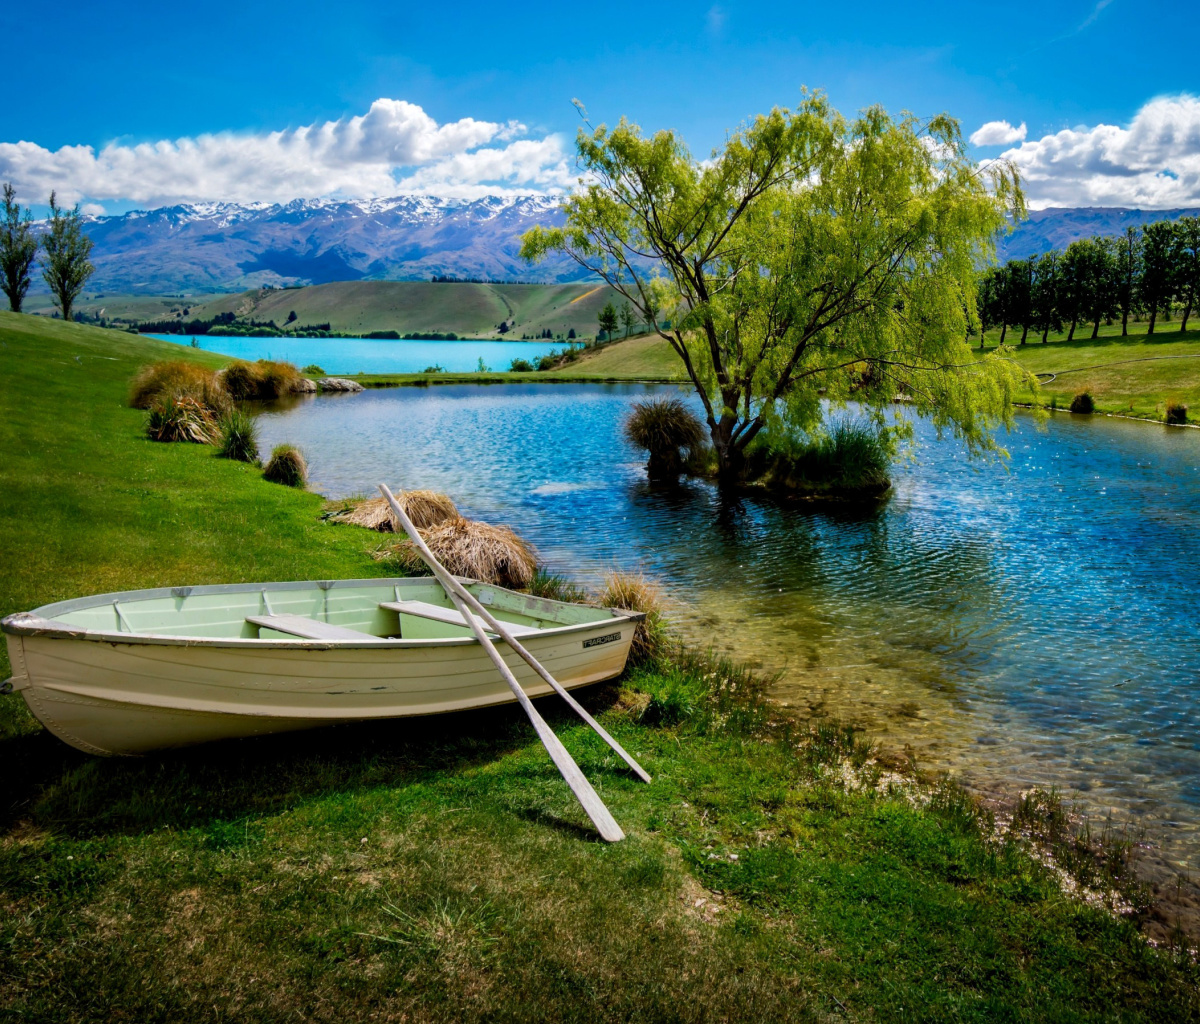 Boat on Mountain River wallpaper 1200x1024